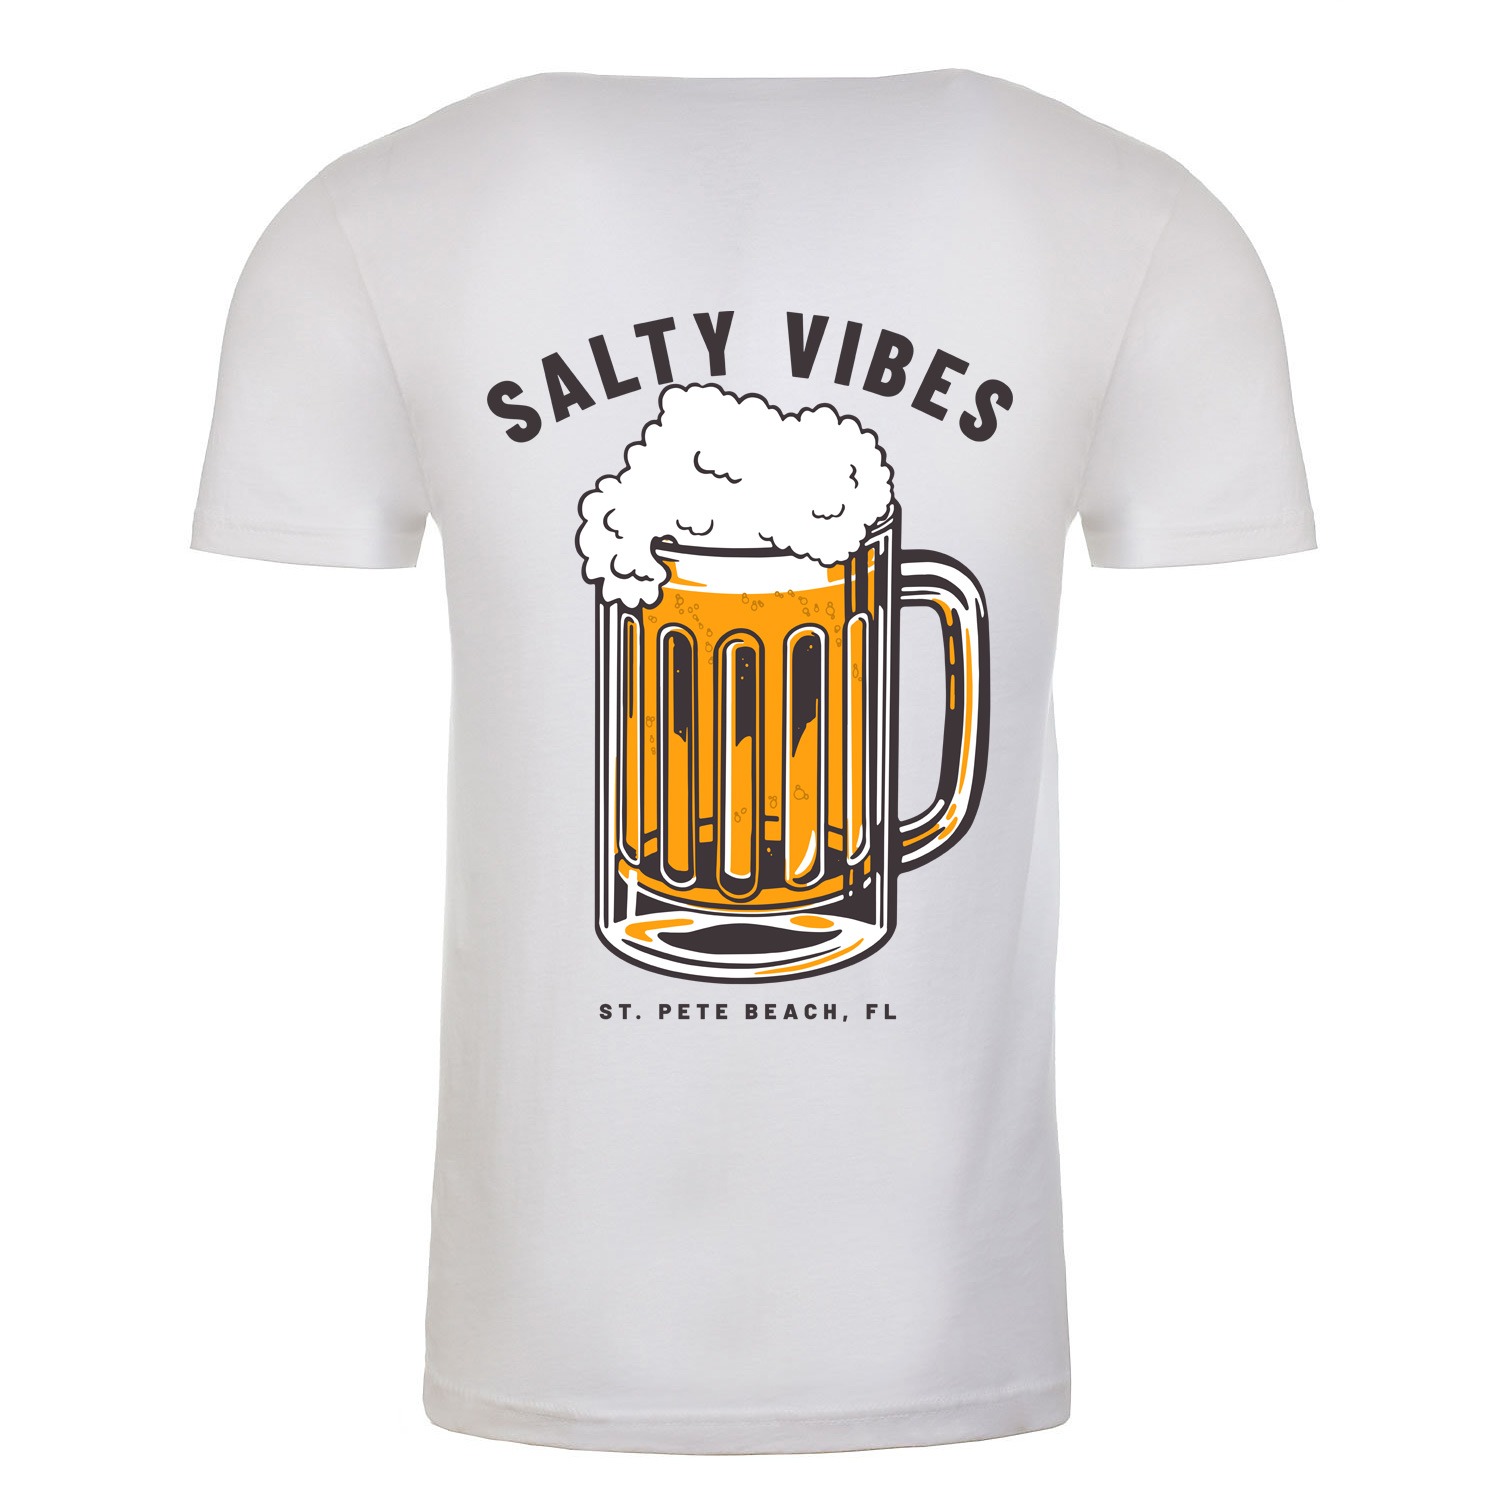 Salty Vibes Beer Unisex T-Shirt - White, 2XL